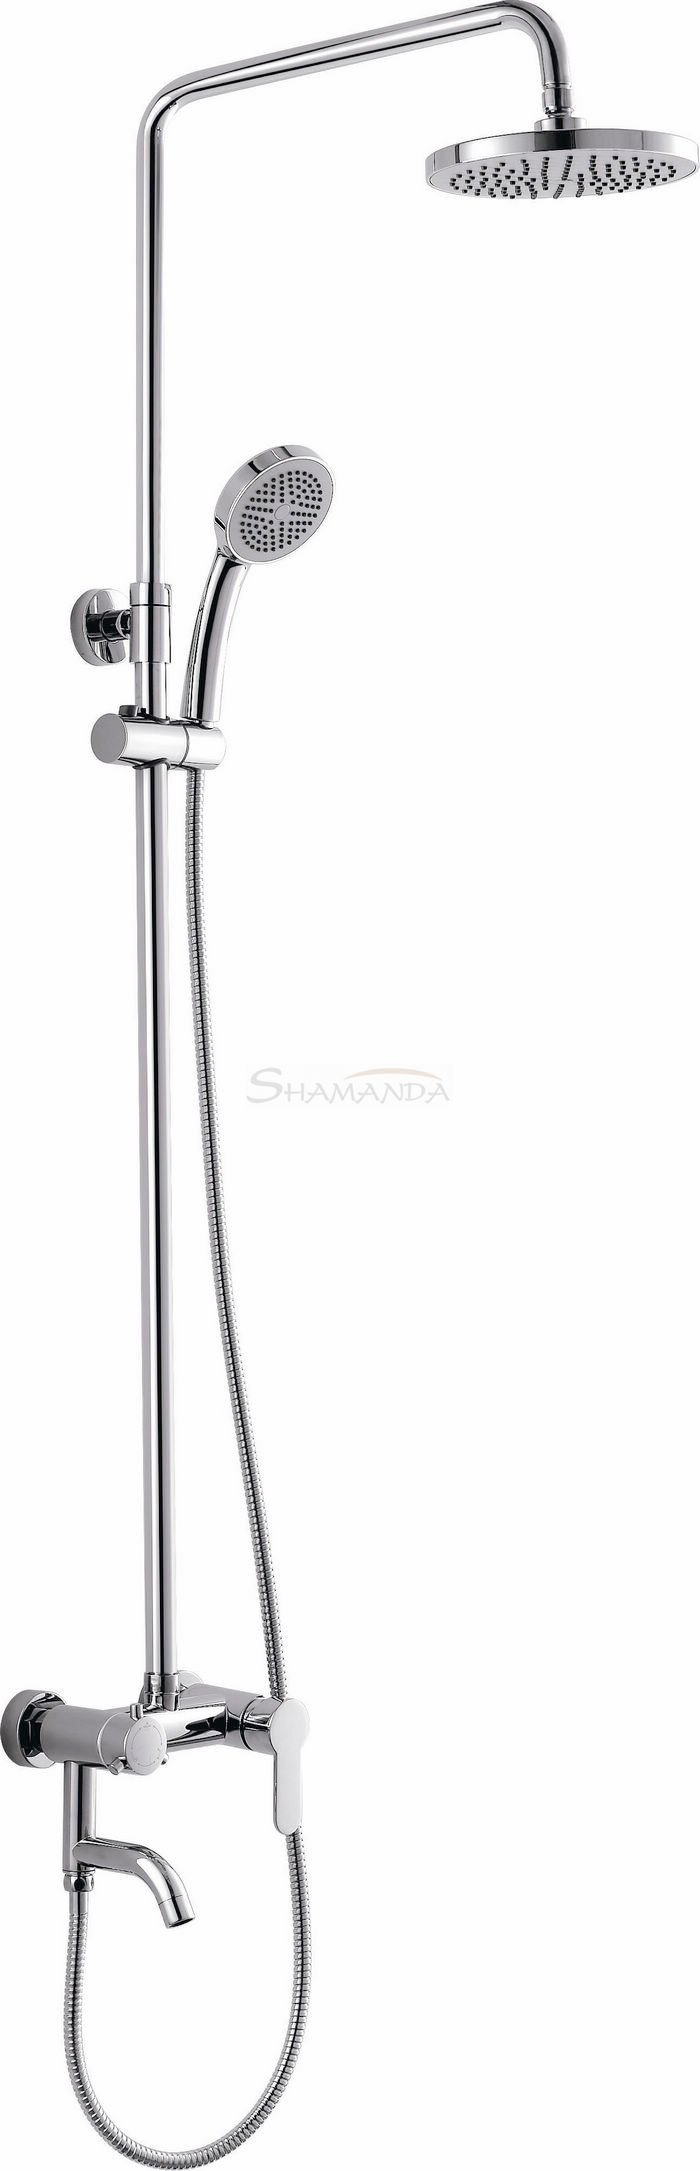 Free shipping Bathroom Luxury Wall Mounted Bathtub and Square Rain Shower Faucet Set Mixing Chrome Tap 17061 [5 years warranty]